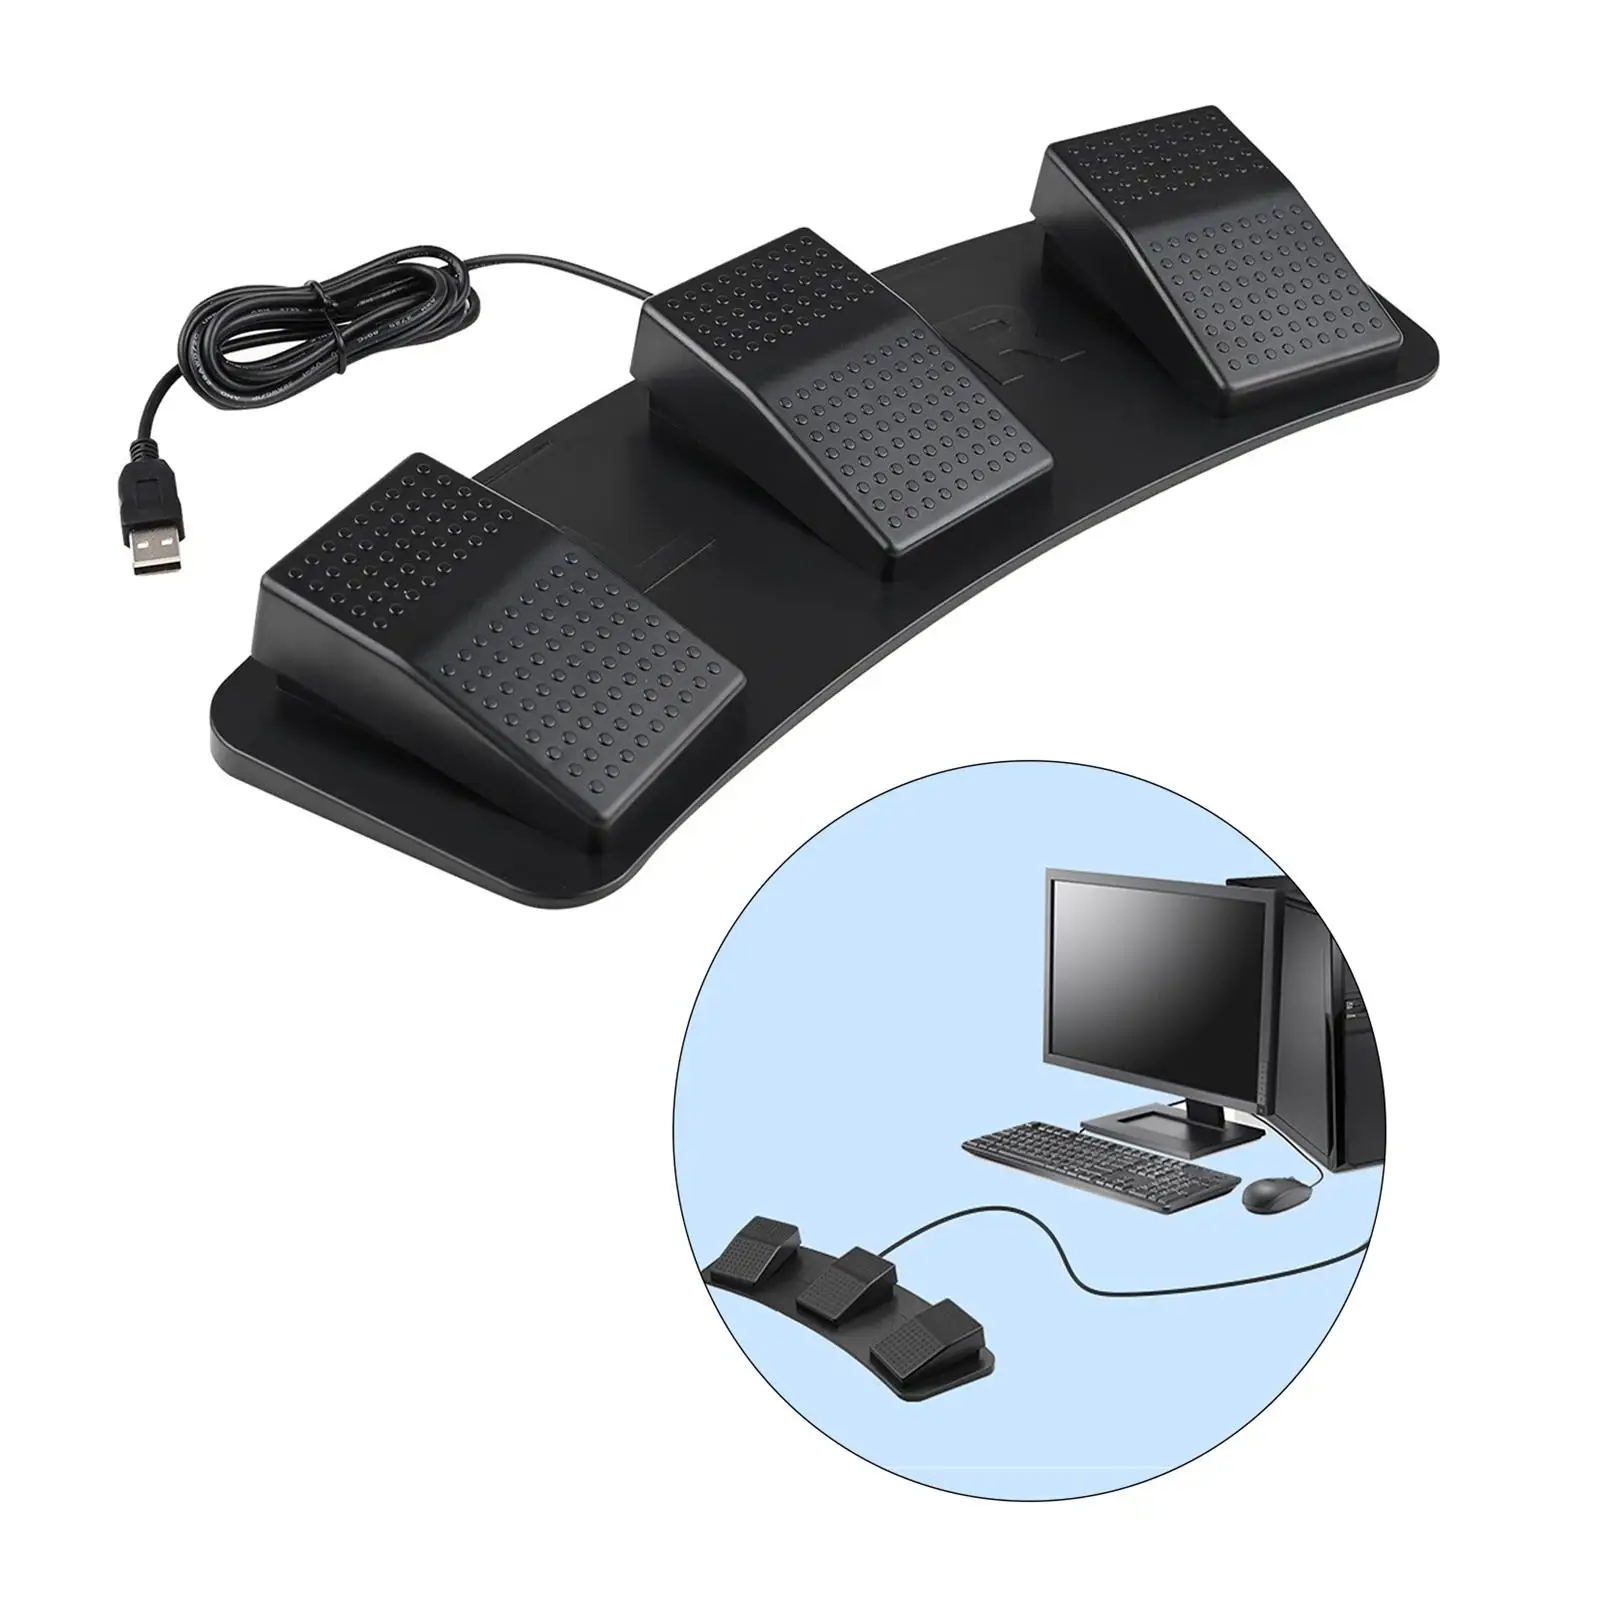 USB Foot Pedal PC Triple Foot Switch Switch Control PC Game Foot Pedal Gaming Equipment Keyboard Video Game PC Laptop Mouse